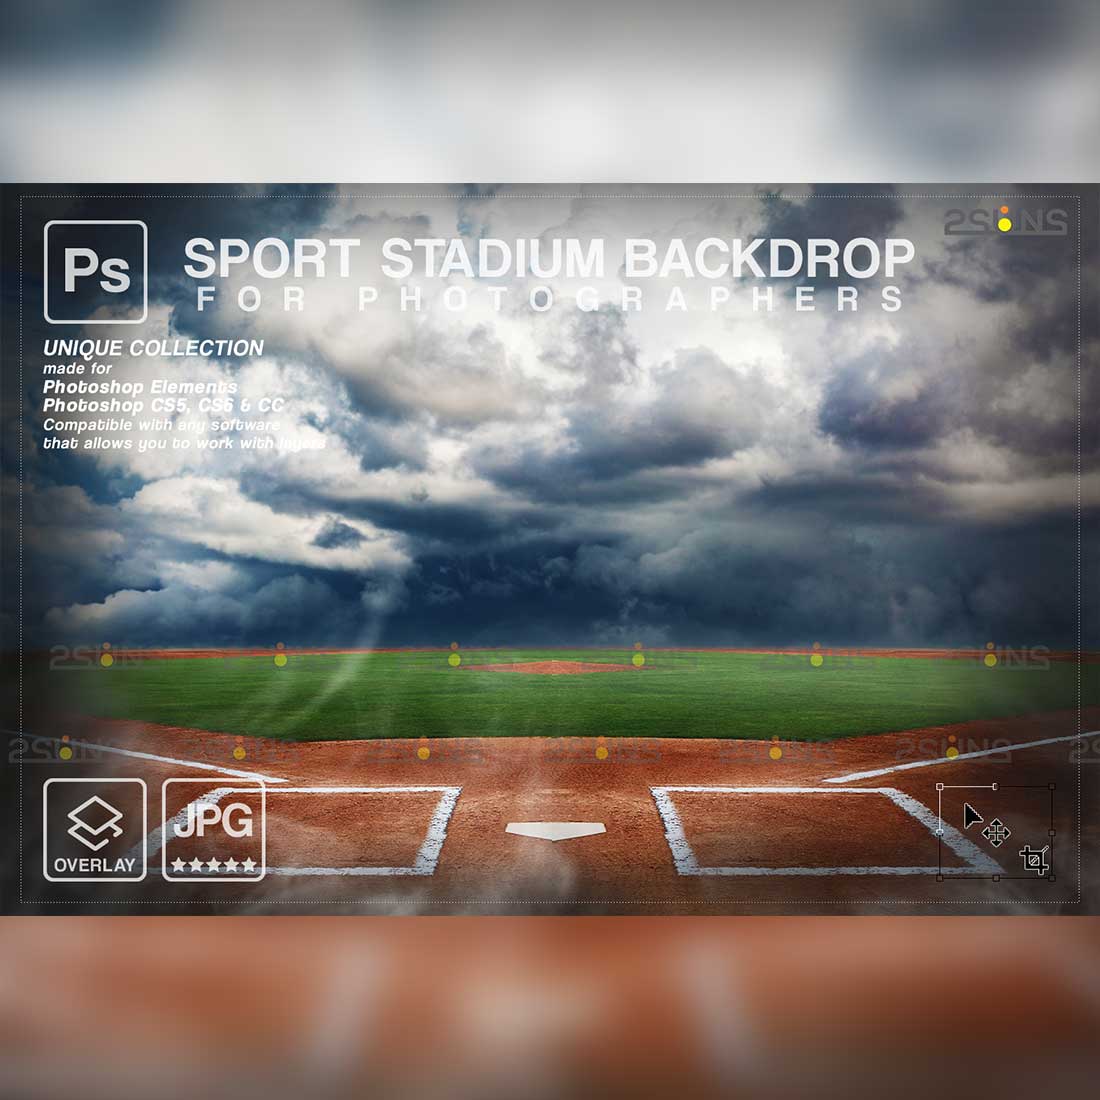 Softball Backdrop Sports Digital Photoshop Overlay Preview Image.